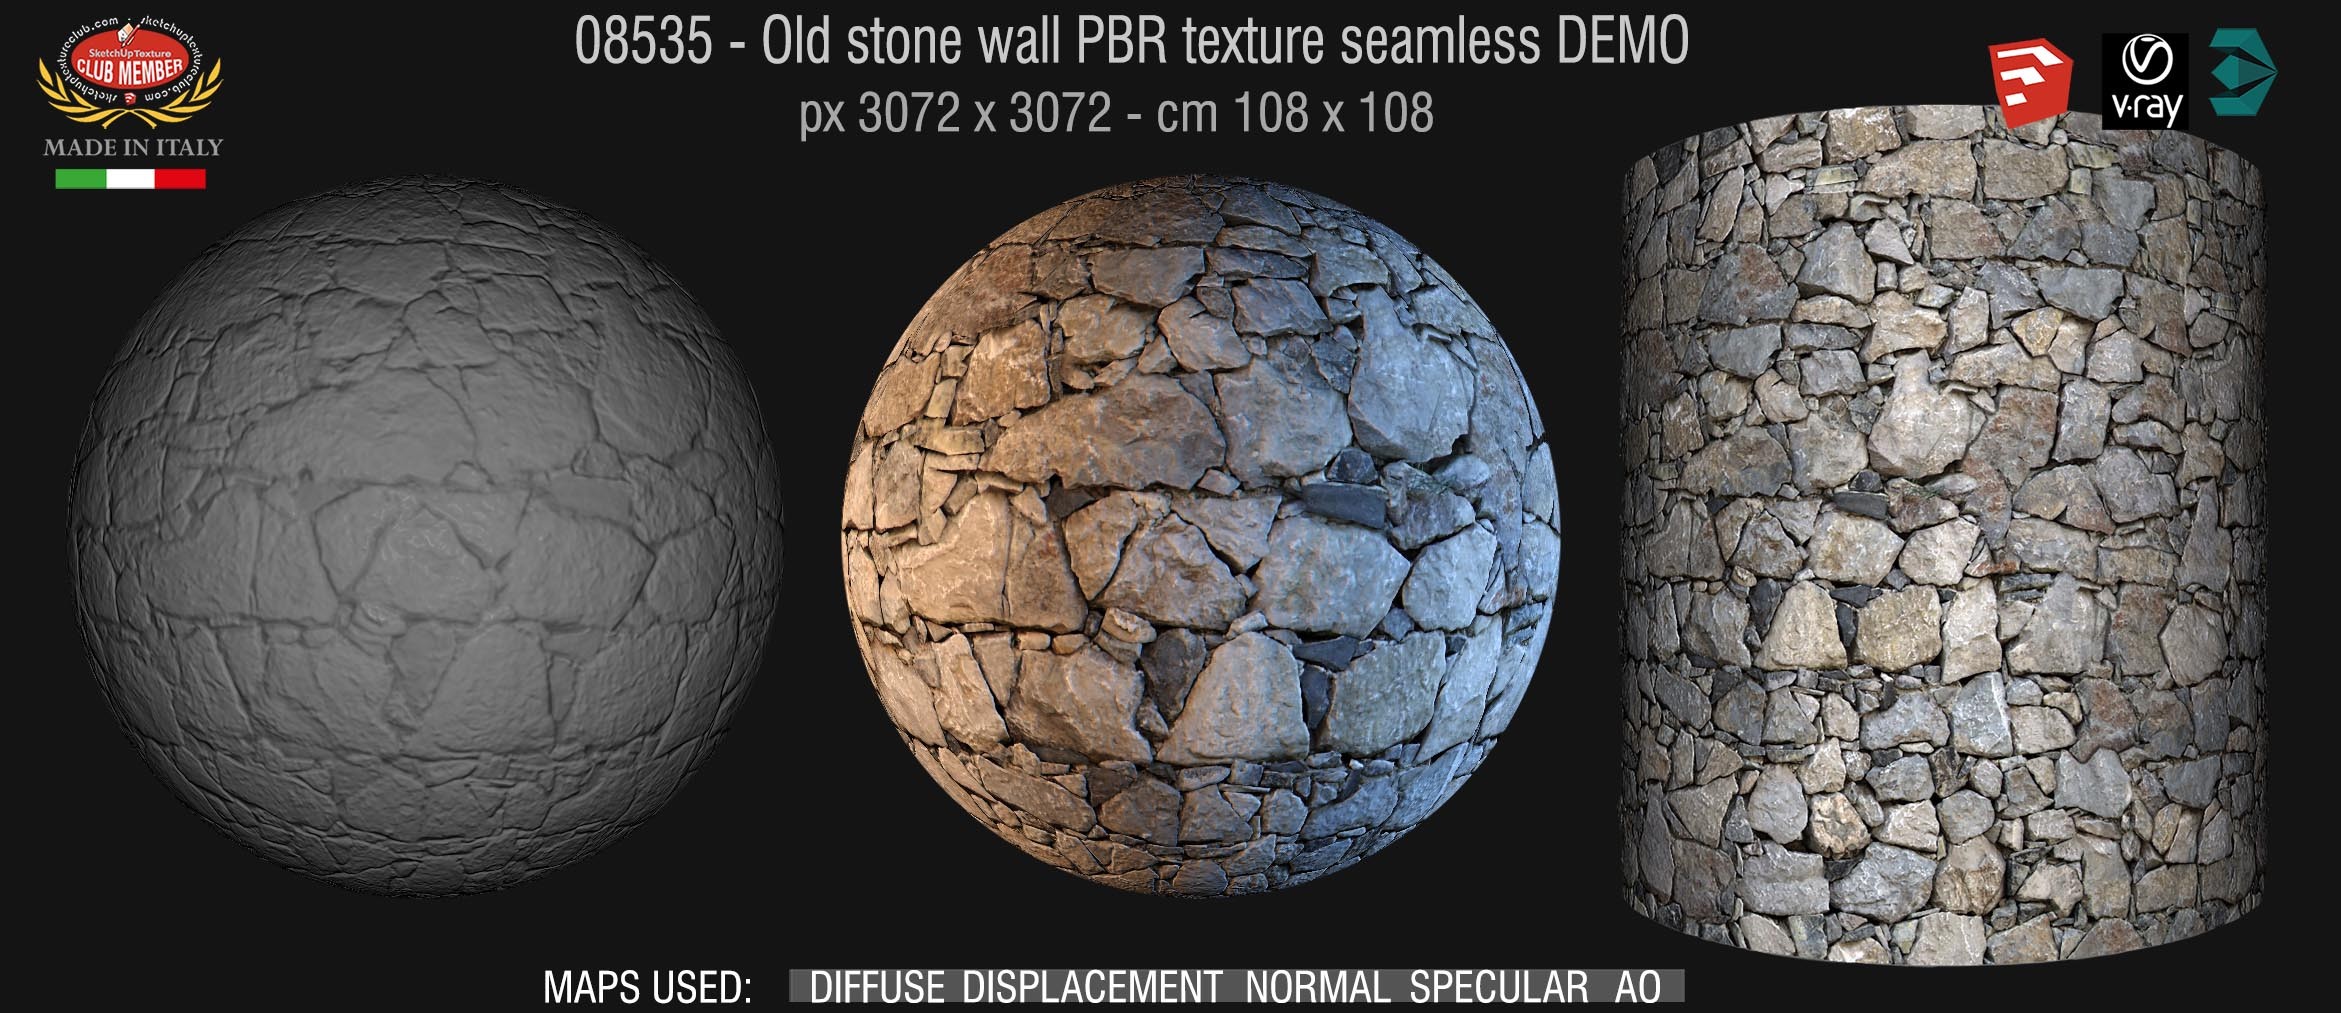 08535 Old stone wall PBR texture seamless DEMO